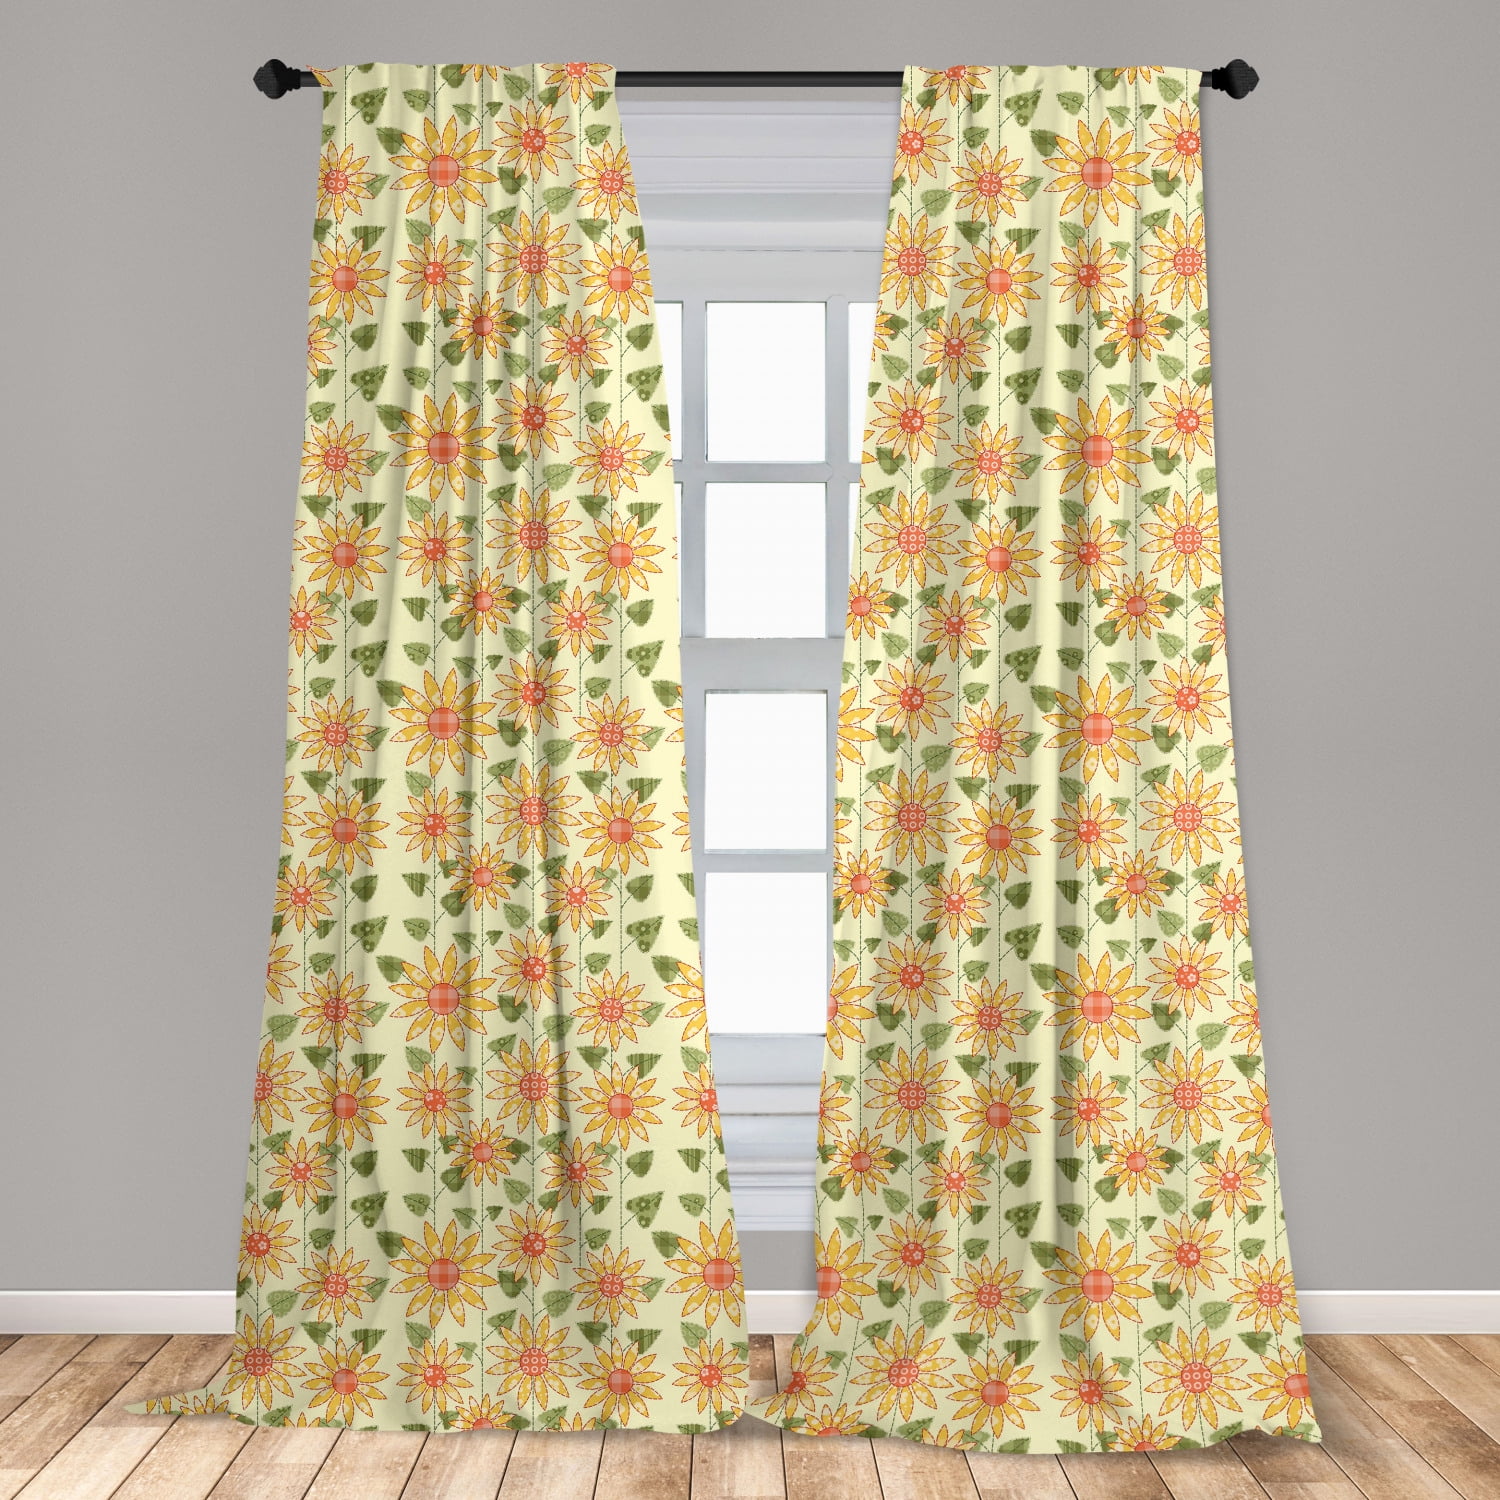 Fall Decor Curtains Flowers Park Nature Window Drapes 2 Panel Set 108x84 Inches 